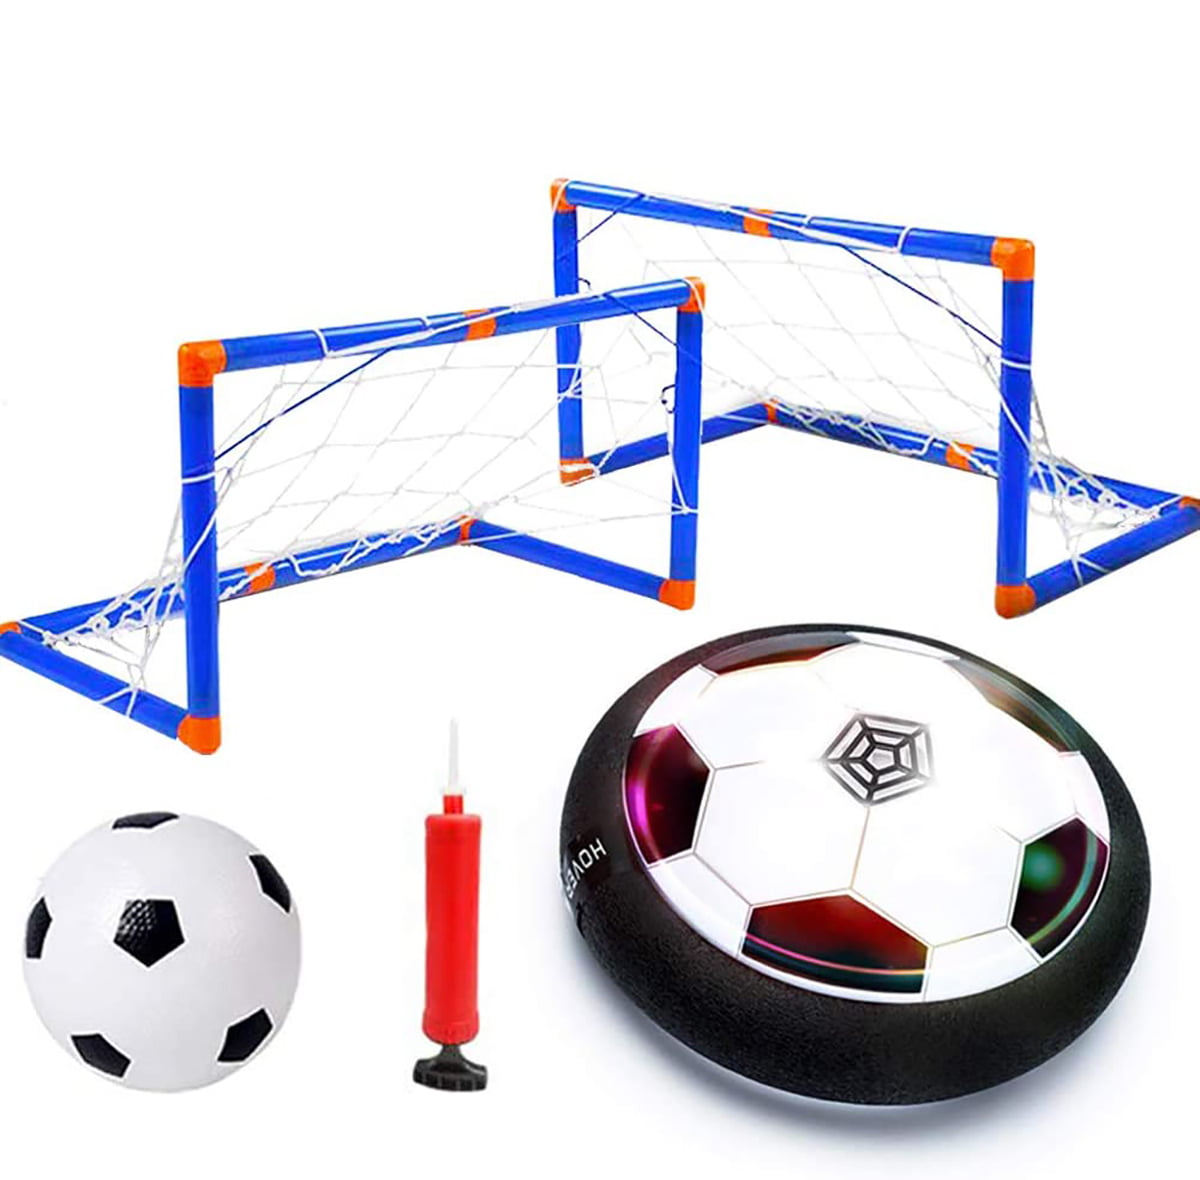 3 Soccer Goal Set Hover Football with 2 Gates for Children Gifts Sports Air Ball Indoor Outdoor Game with LED Lights-Boys / Girls Age of 2 4-16 Ye BOYI BAIVYLE Indoor Sport Kids Toys Hover Soccer Ball 